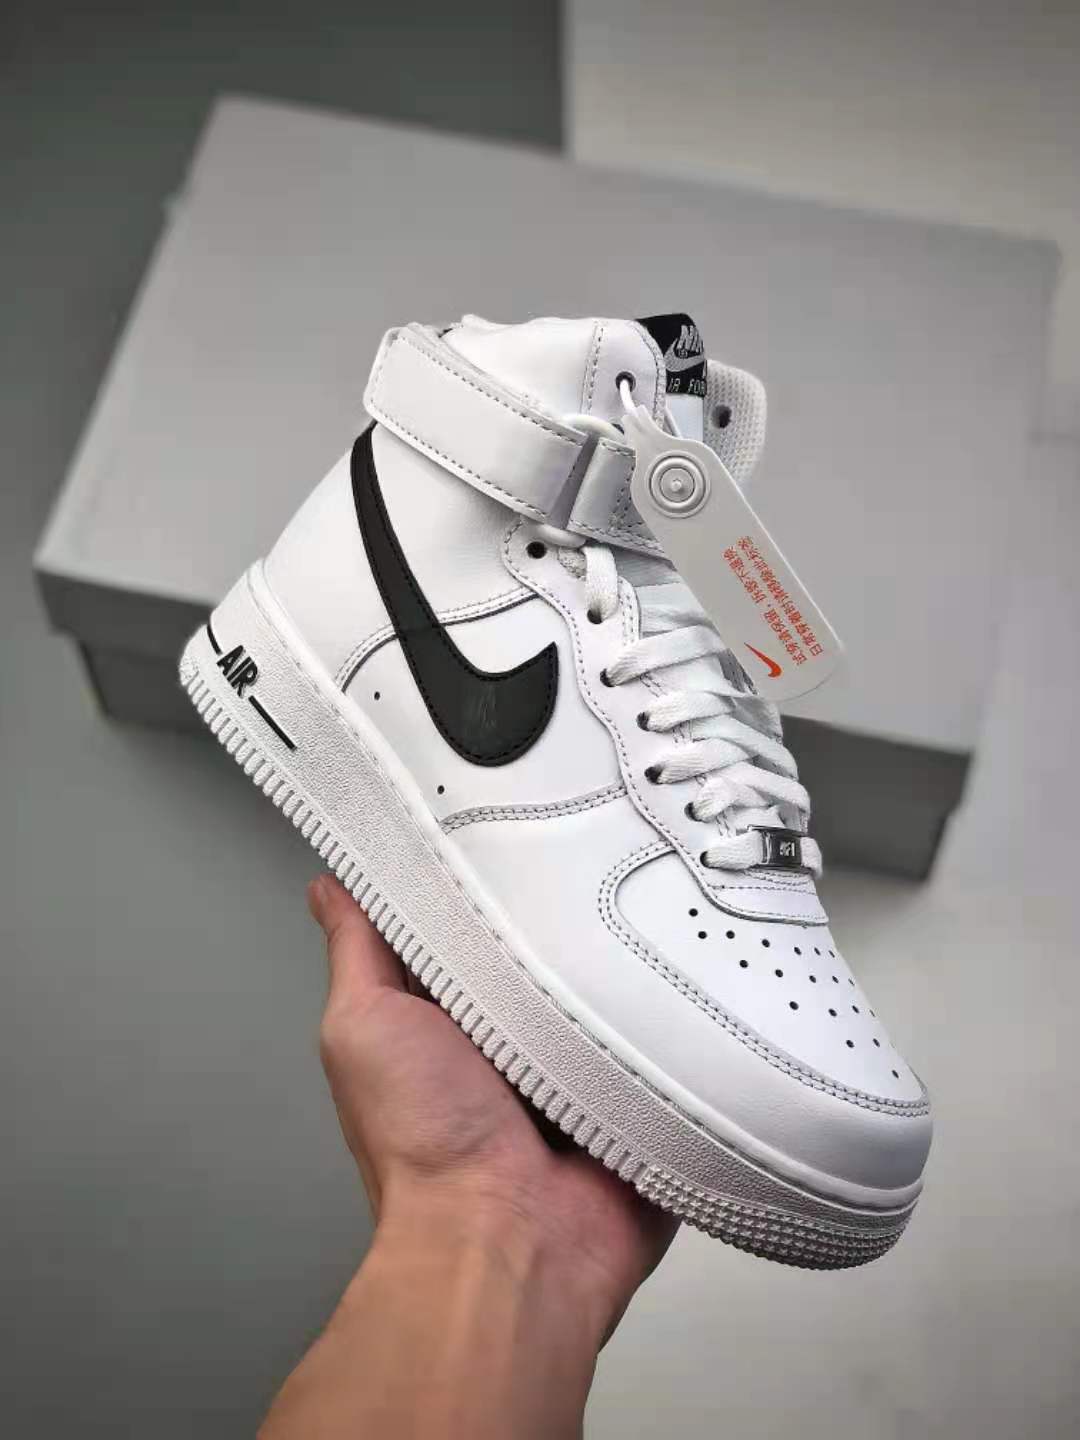 Nike Air Force 1 High 'White Black' CK4369-100 | Iconic Sneakers